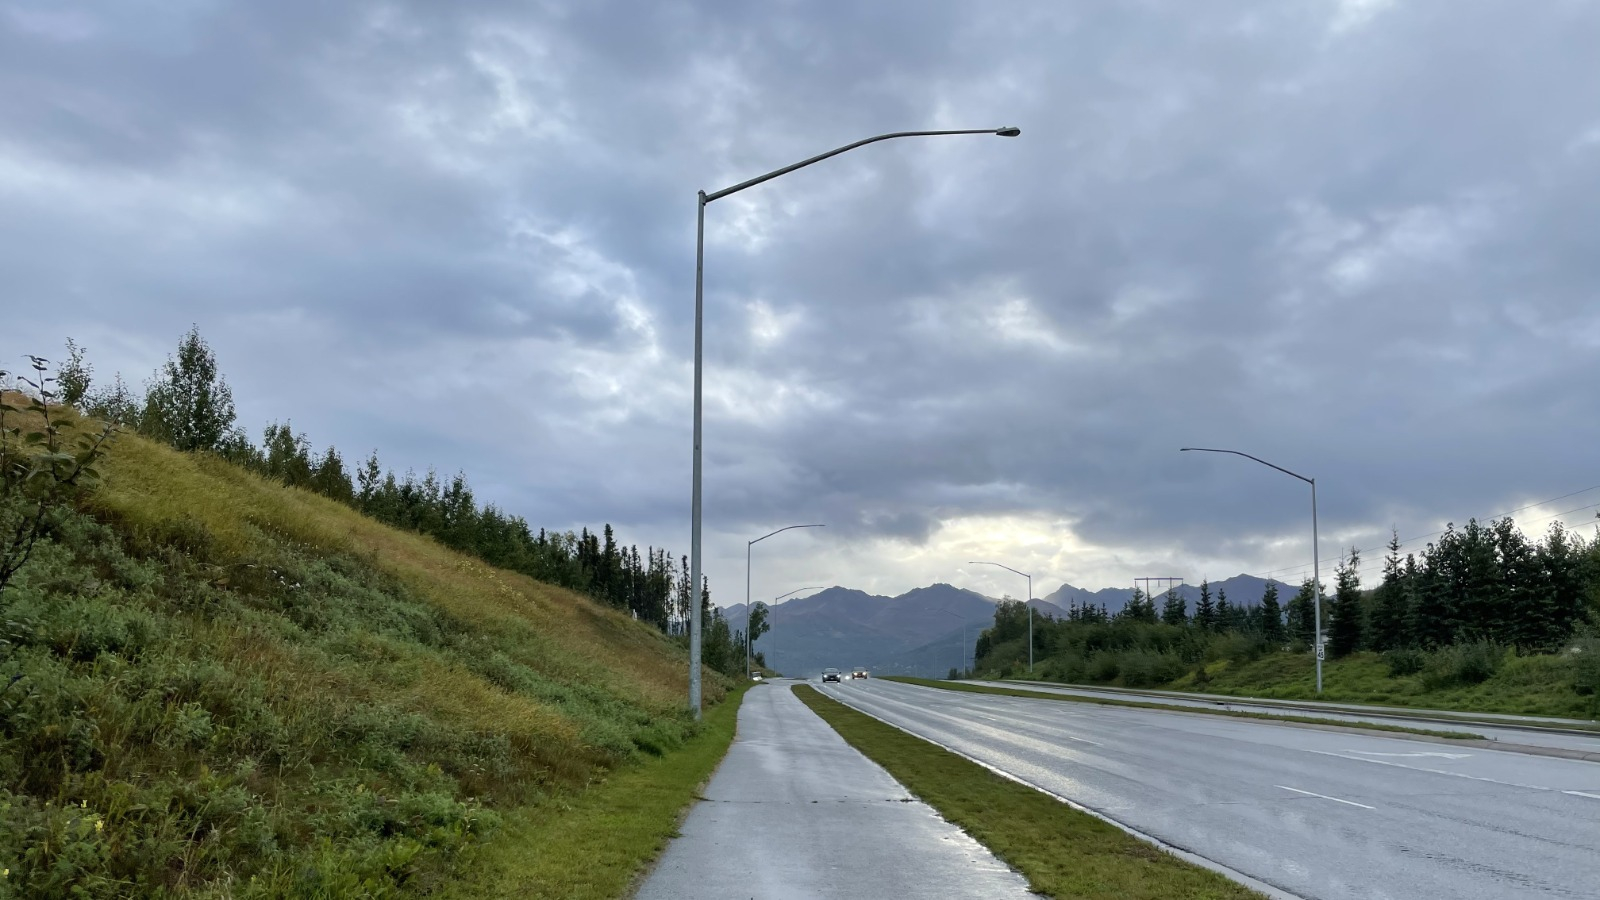 A walking and biking path next to Dowling Road in Anchorage.